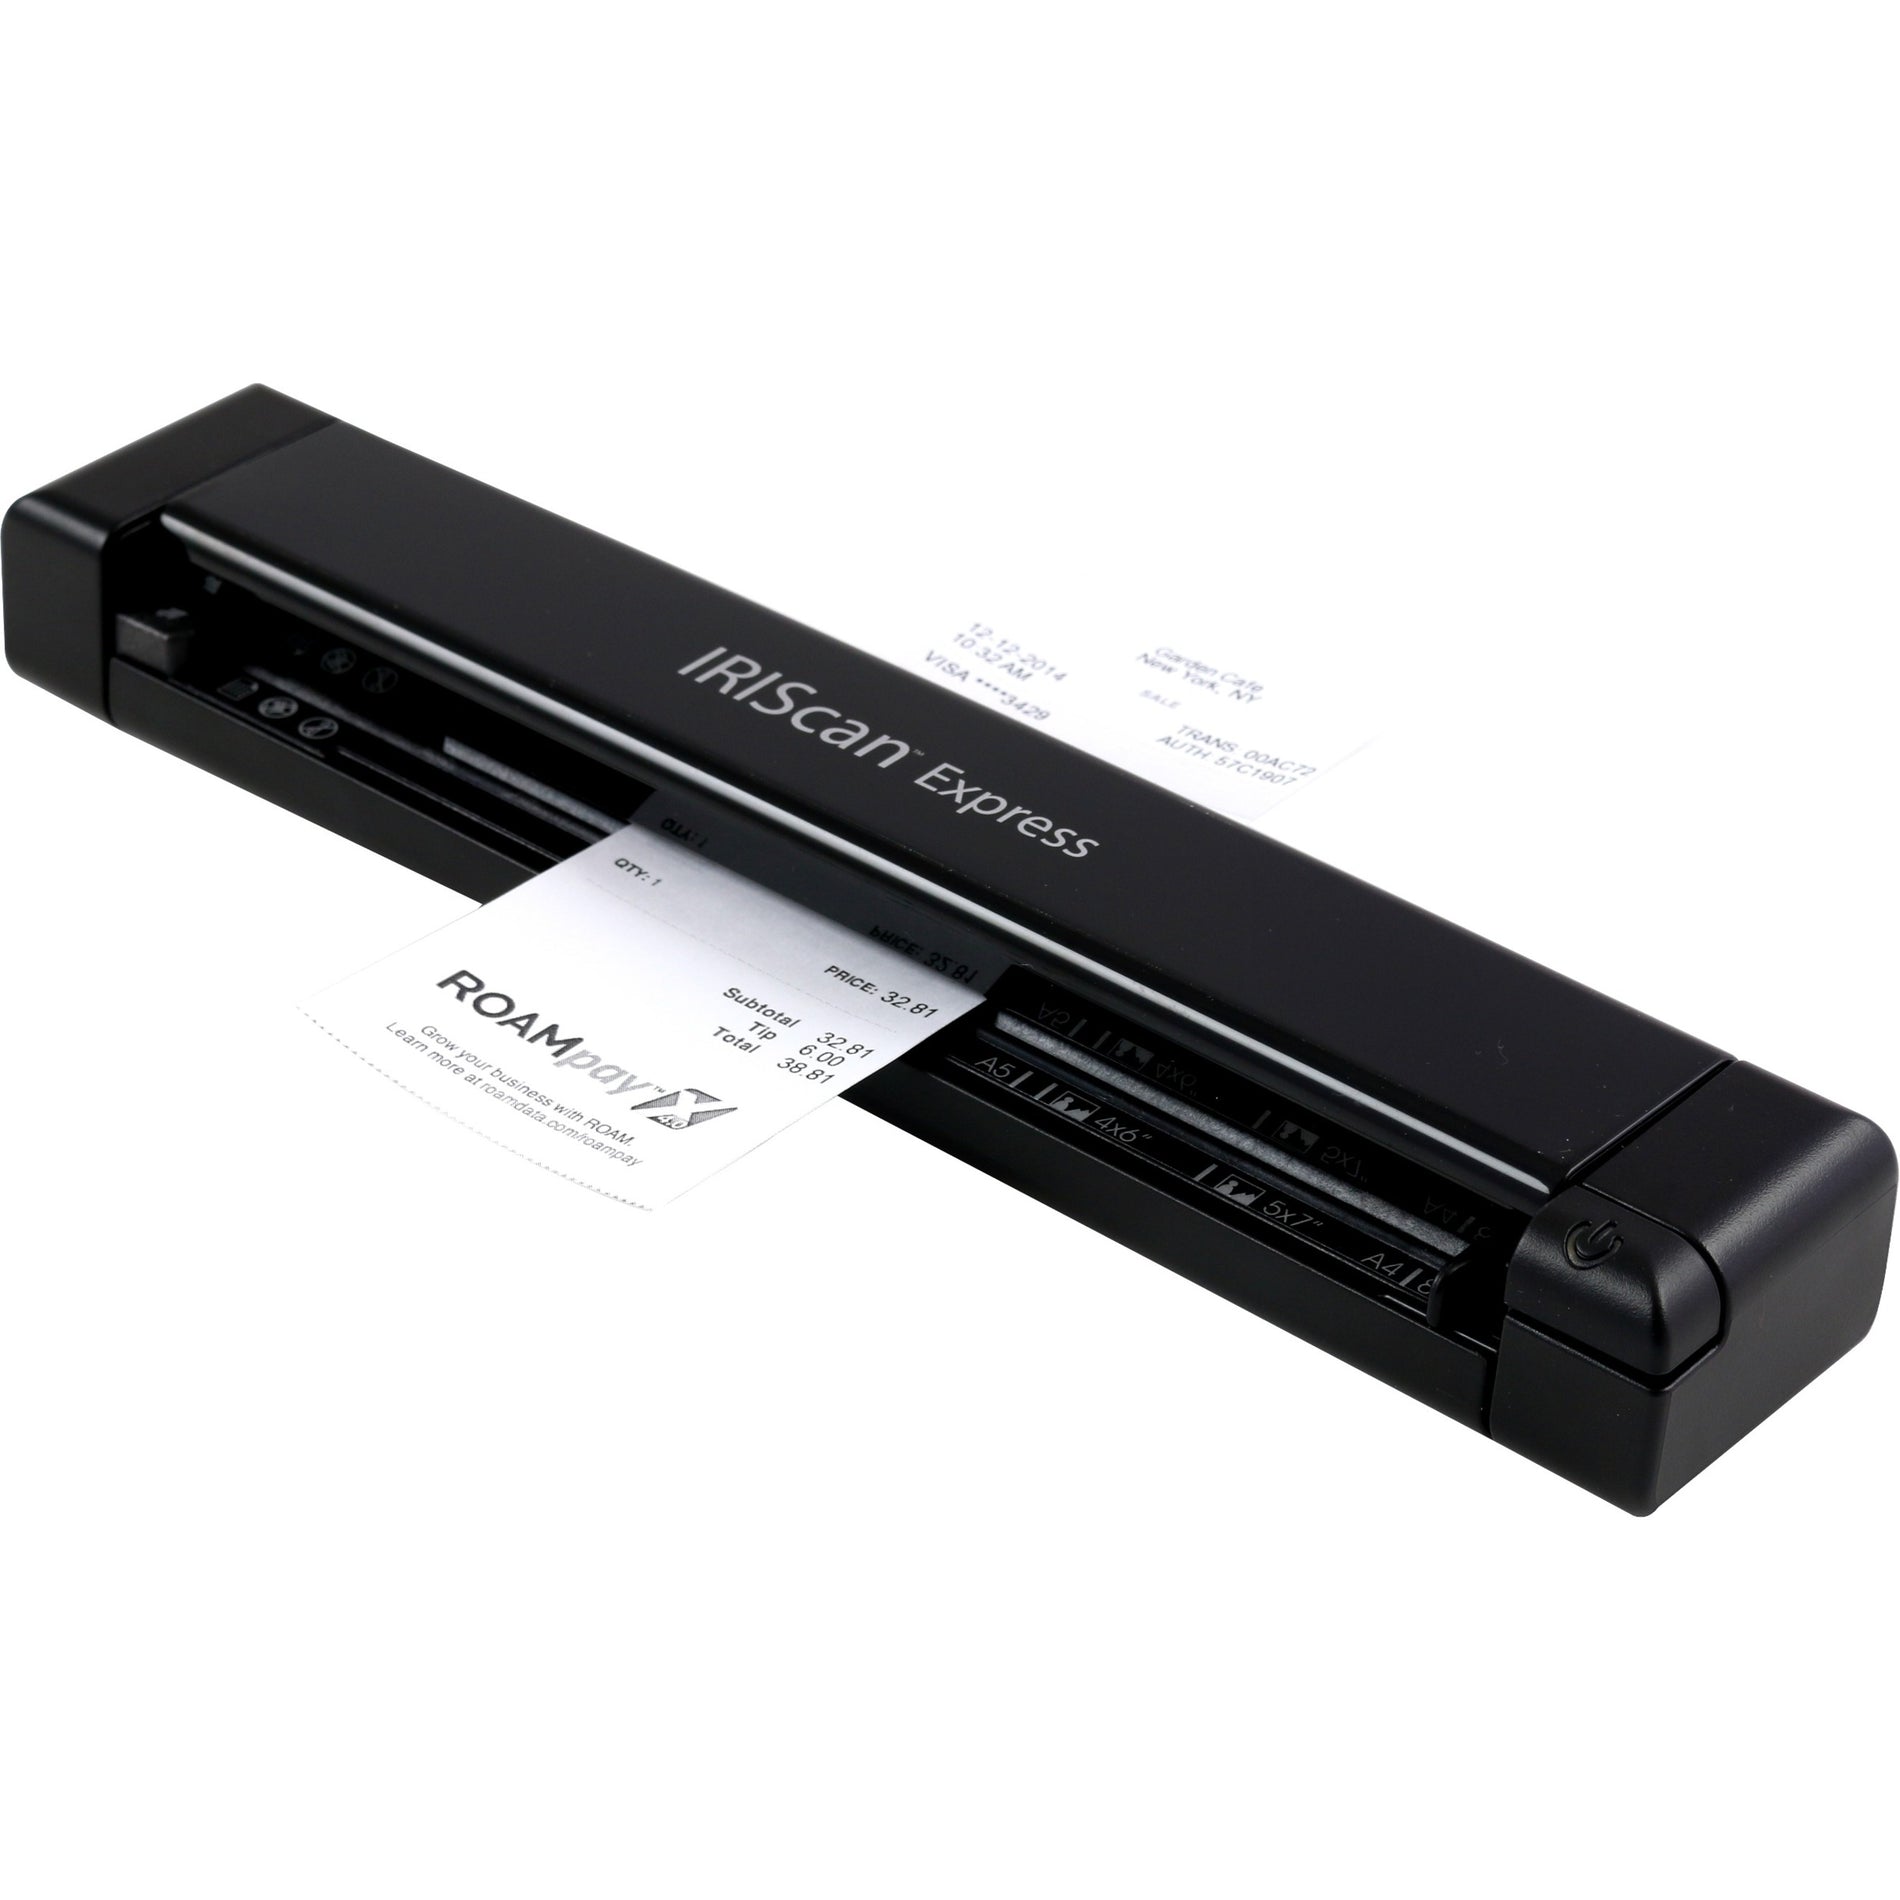 I.R.I.S. 458511 IRISCan Express 4-Usb Portable Scanner, Scans Anything